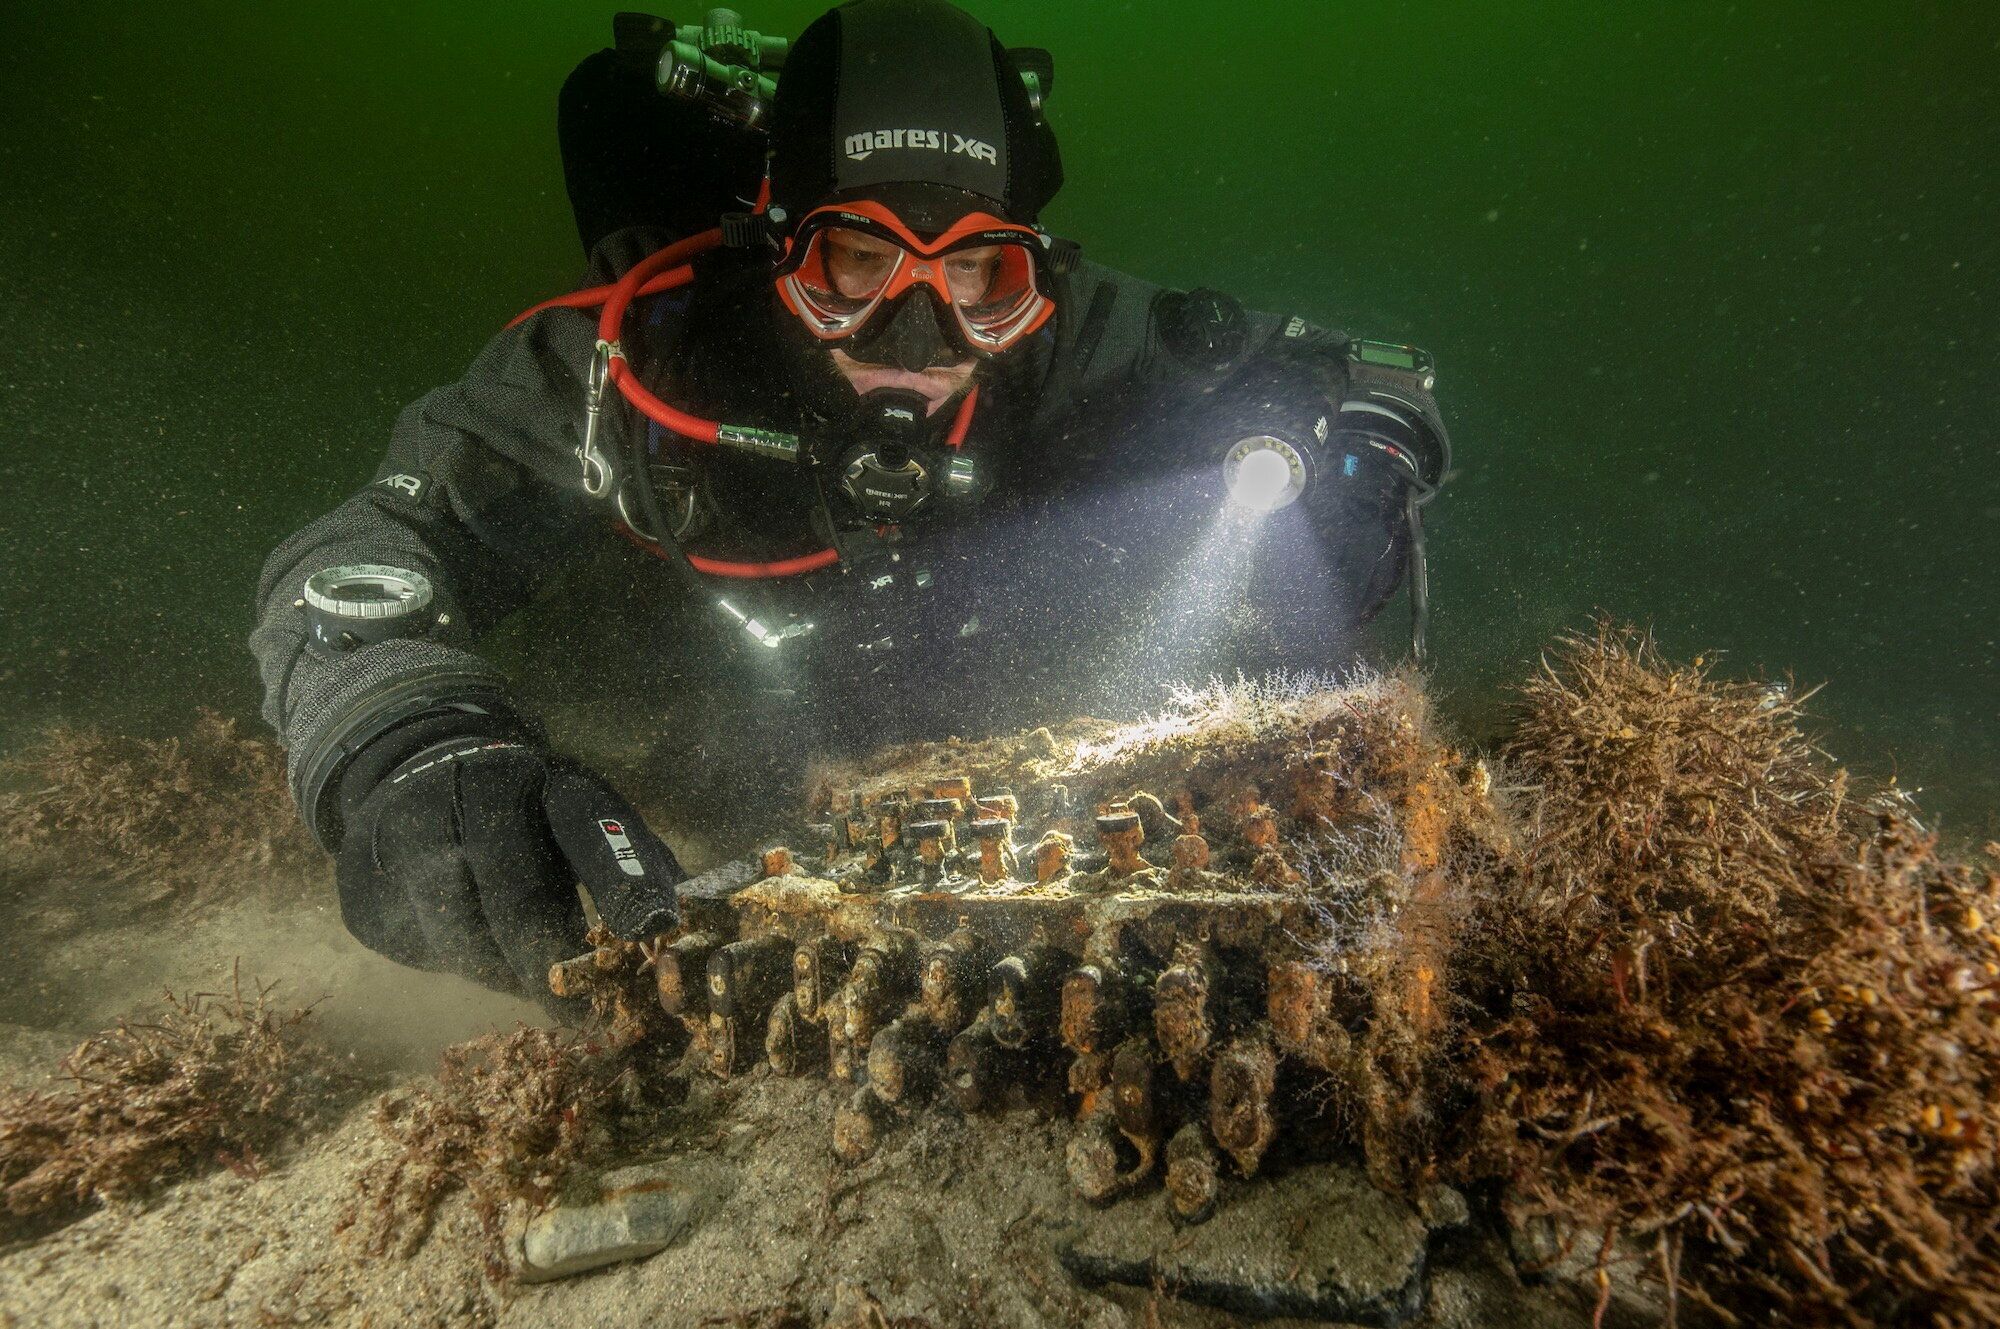 German divers searching the Baltic Sea for discarded fishing nets have stumbled upon a rare Enigma cipher machine used by the